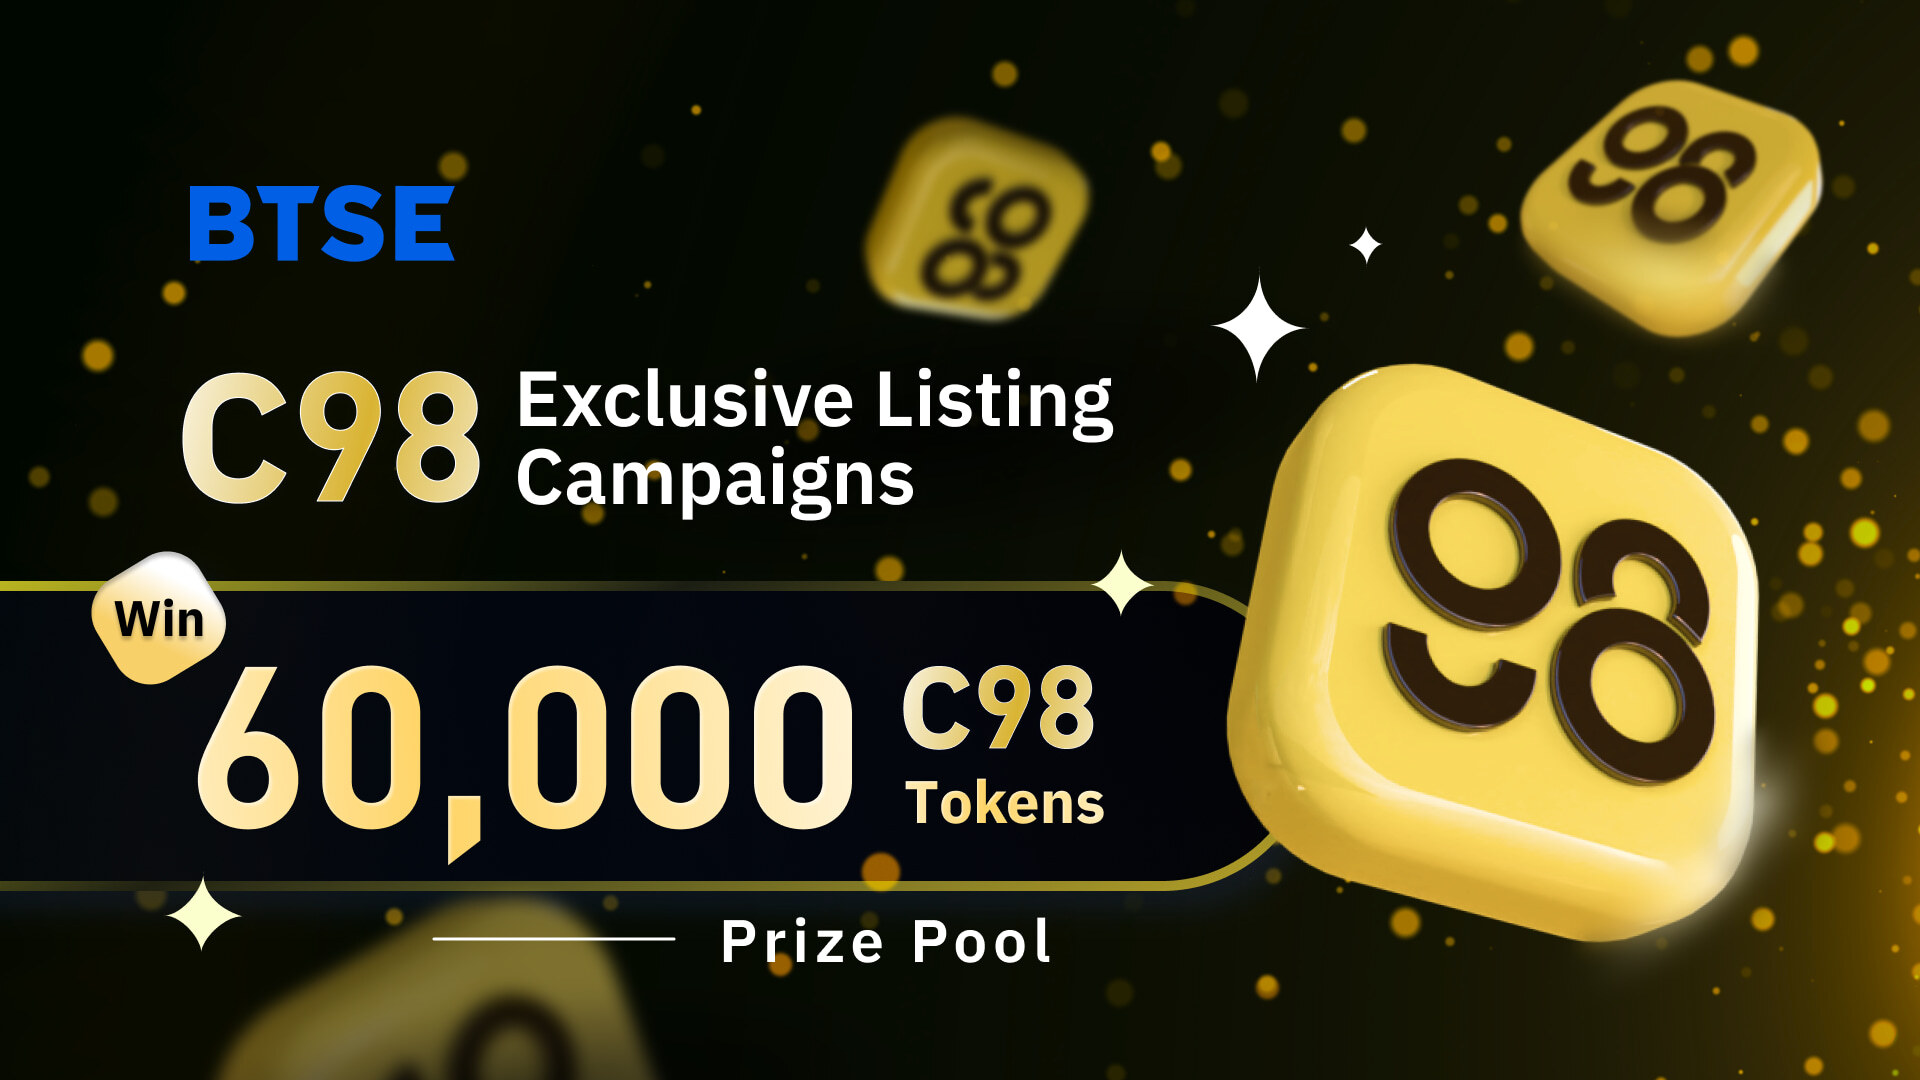 Celebrate Coin98's BTSE Debut: Win from a 60,000 C98 Token Prize Pool!